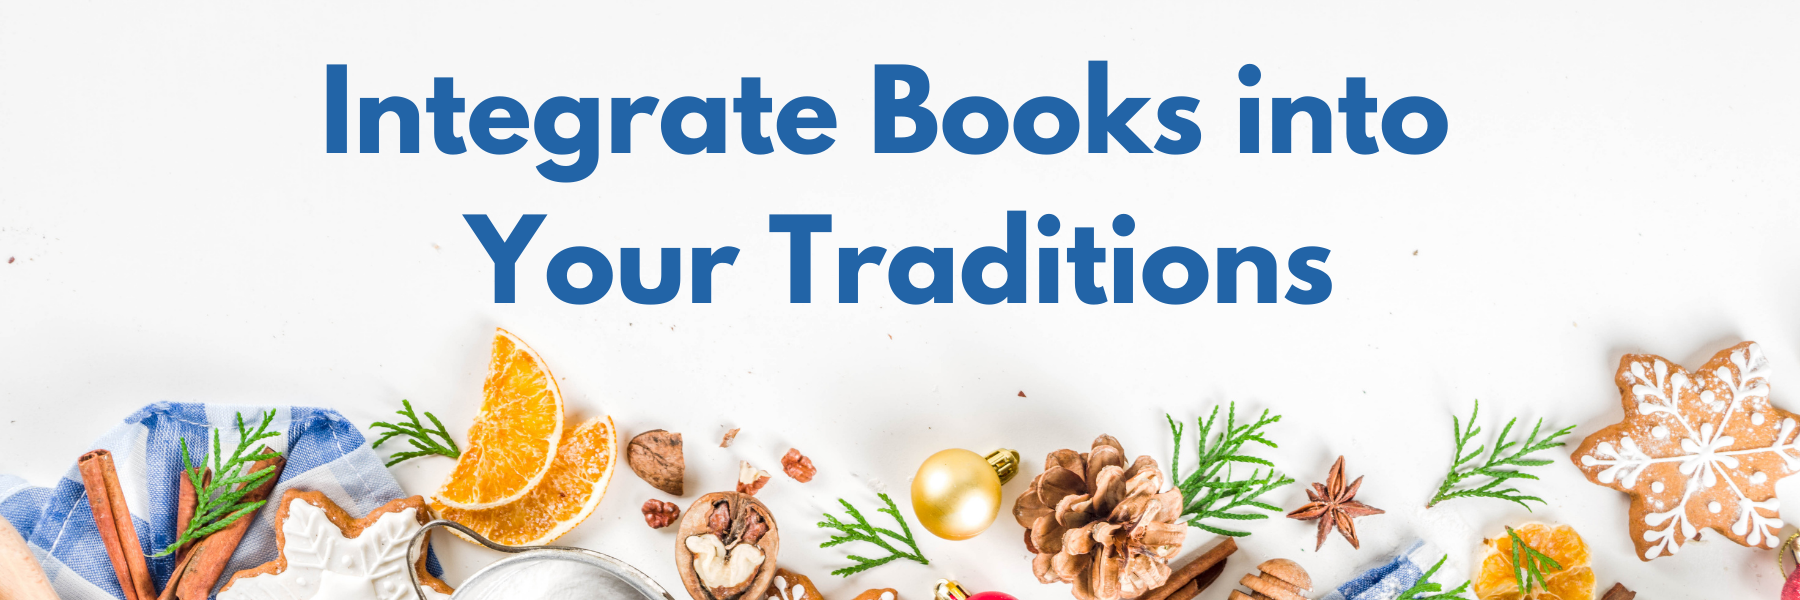 integrate books into your traditions